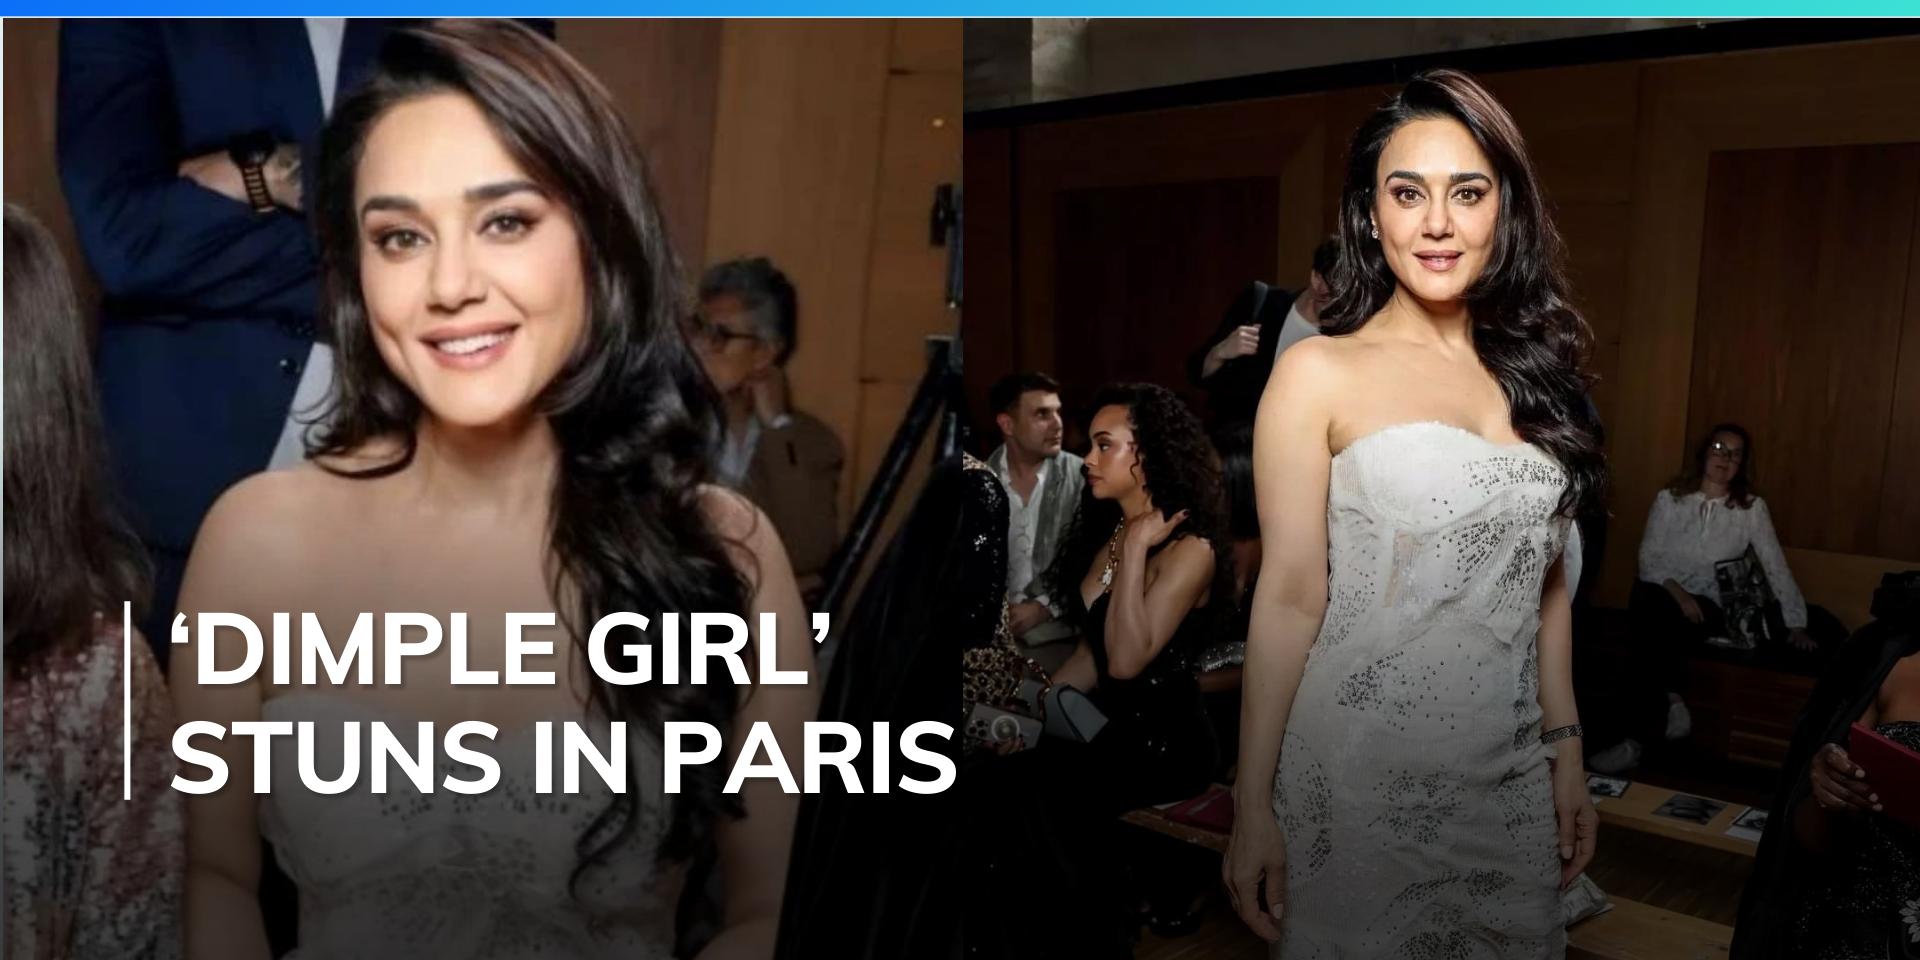 Preity Zinta stuns fans with her flawless look as she attends Rahul Mishra‘s show in Paris